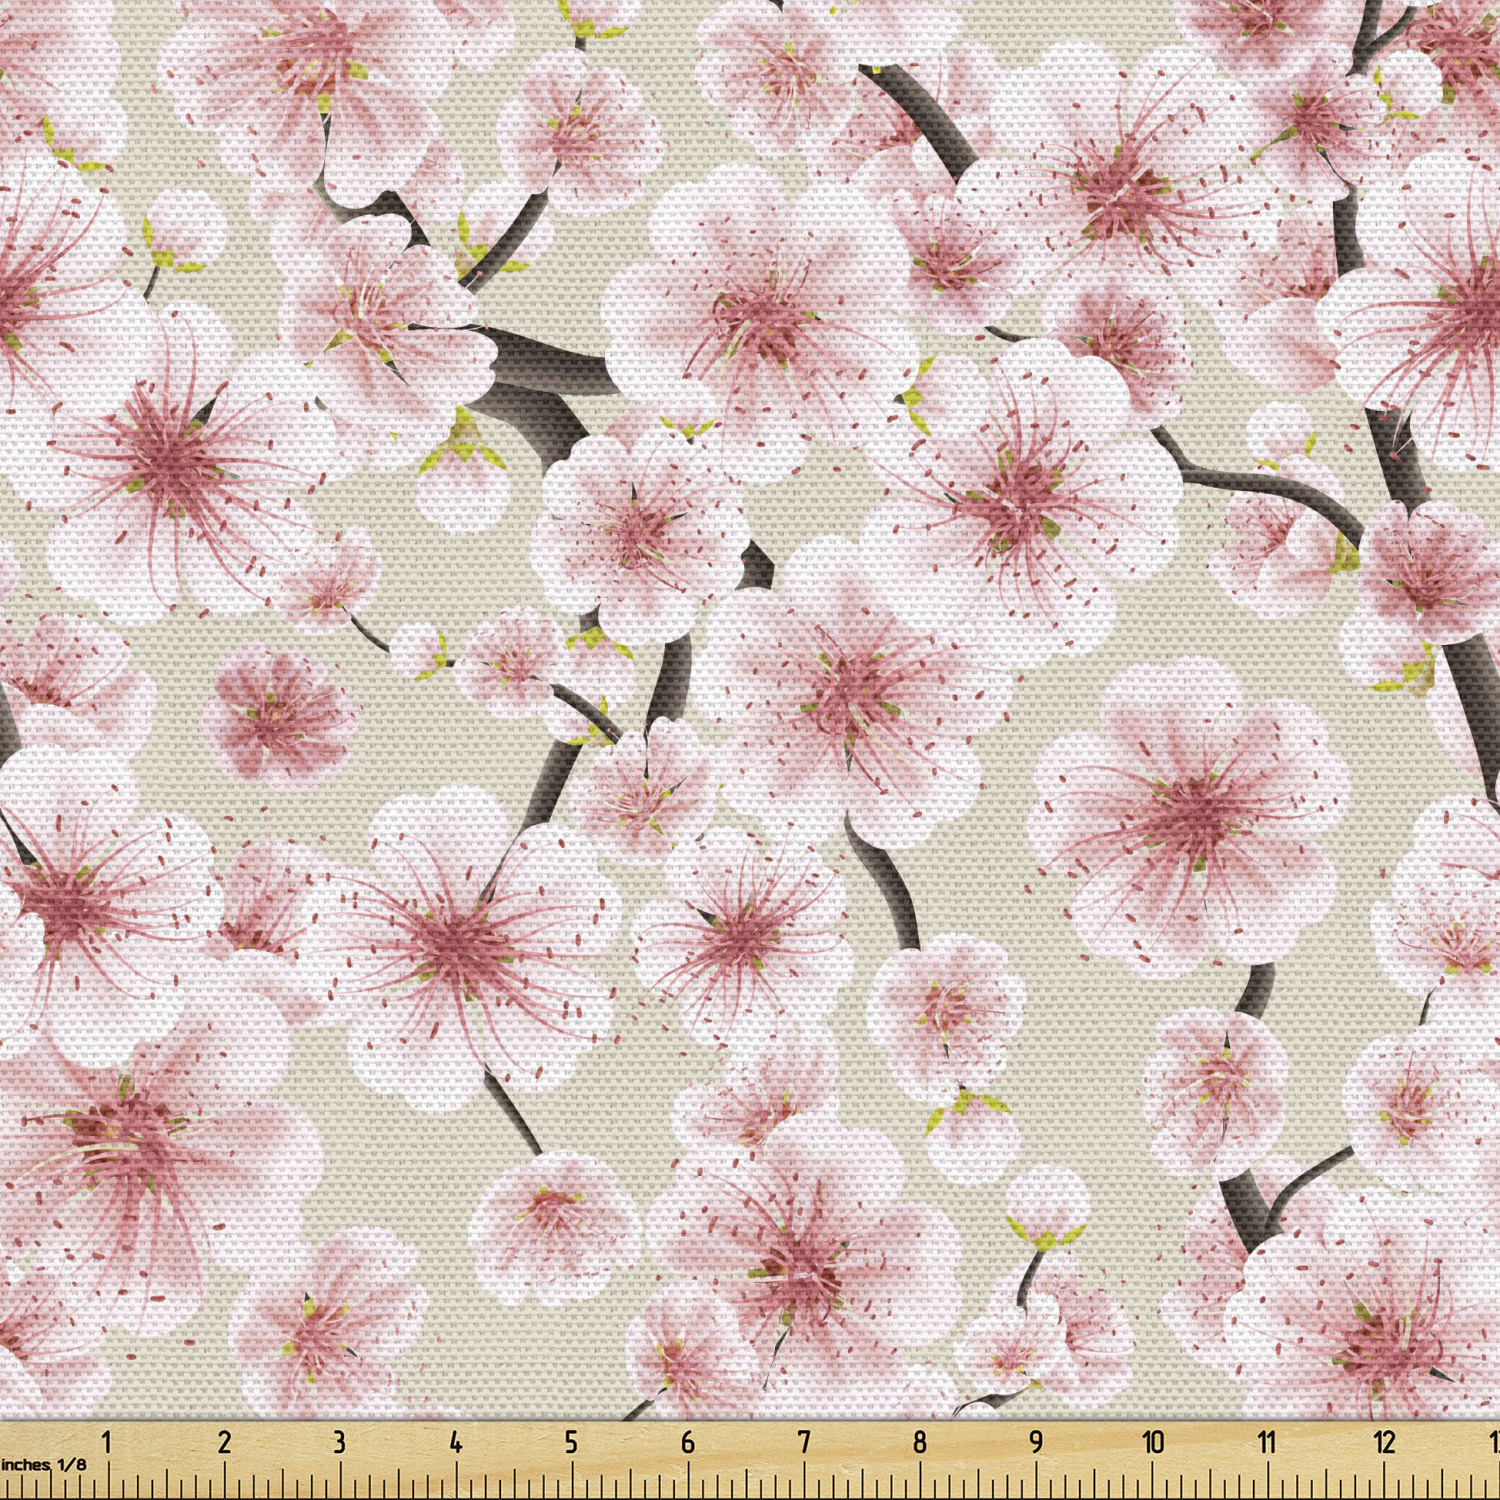 Cherry Blossom Fabric by the Yard, Japanese Flowers Symbolic of Spring in a Random Arrangement, Decorative Upholstery Fabric for Chairs & Home Accents, 1 Yard, Coral Pale Green Brown by Ambesonne - image 1 of 4